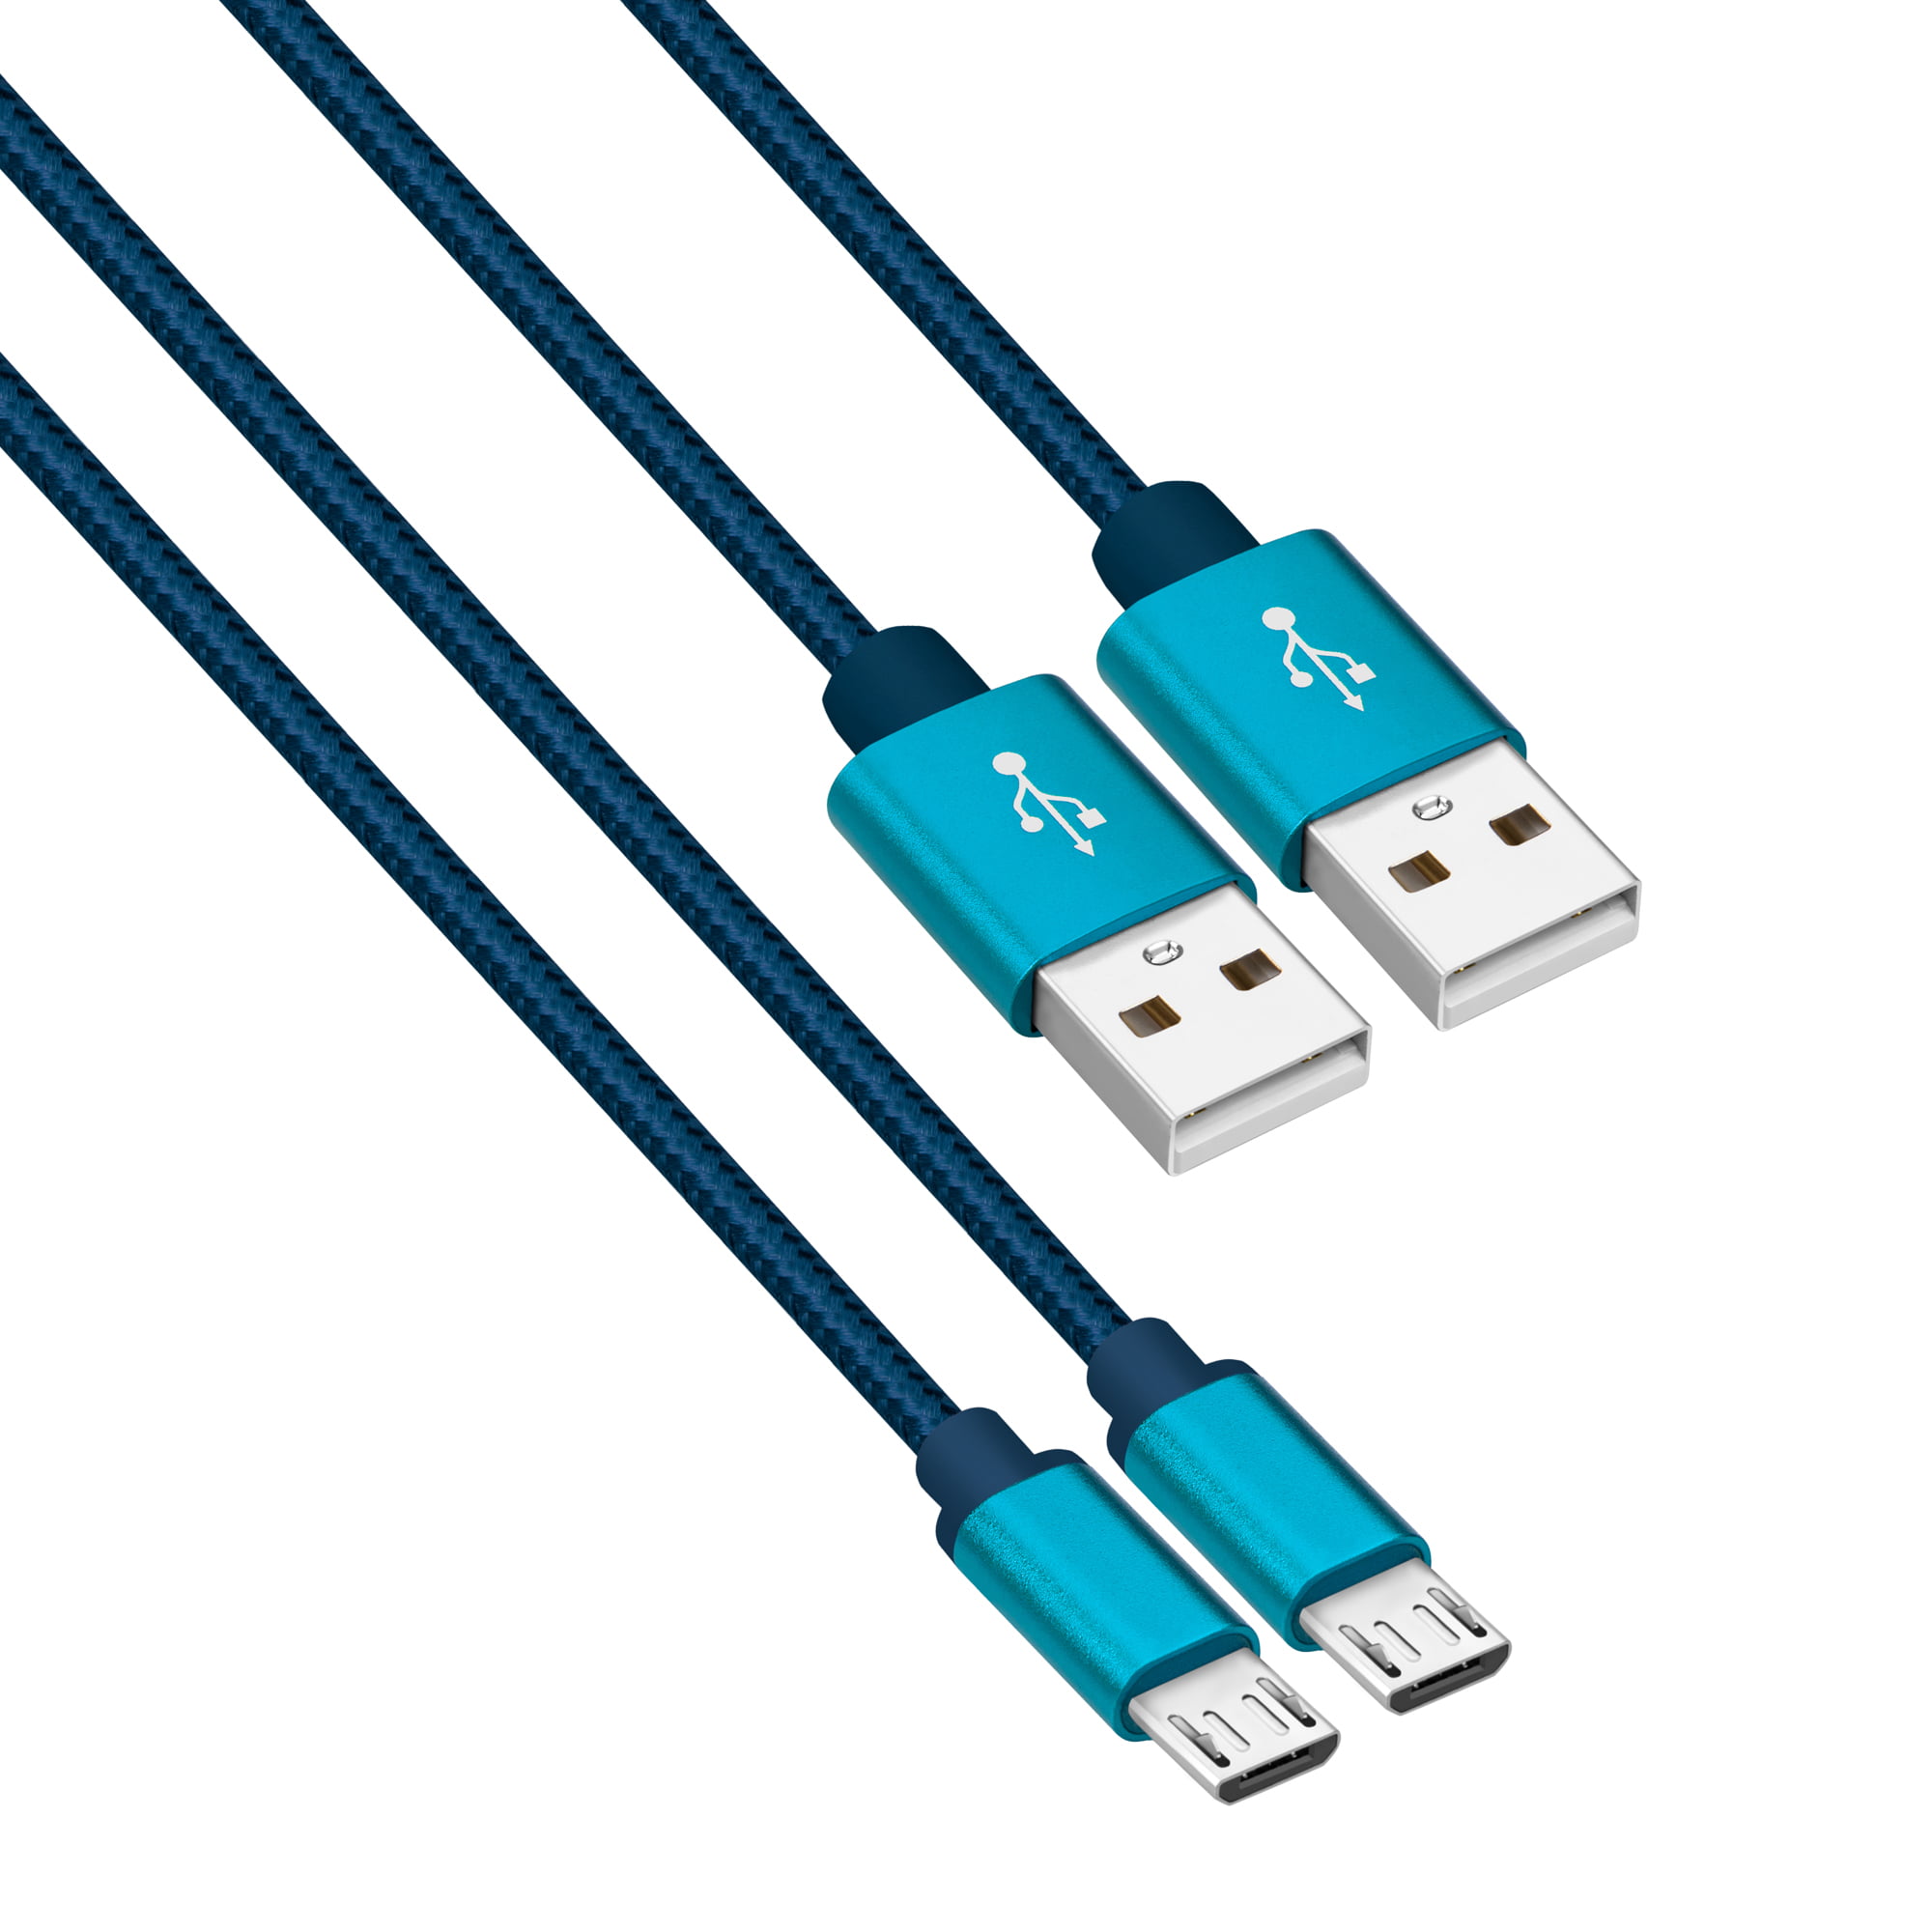 [2 Pack] Micro USB Cable 2FT, Lonian USB A Male to Micro USB Sync Charging Android Phone Charger Cable Compatible with PS4